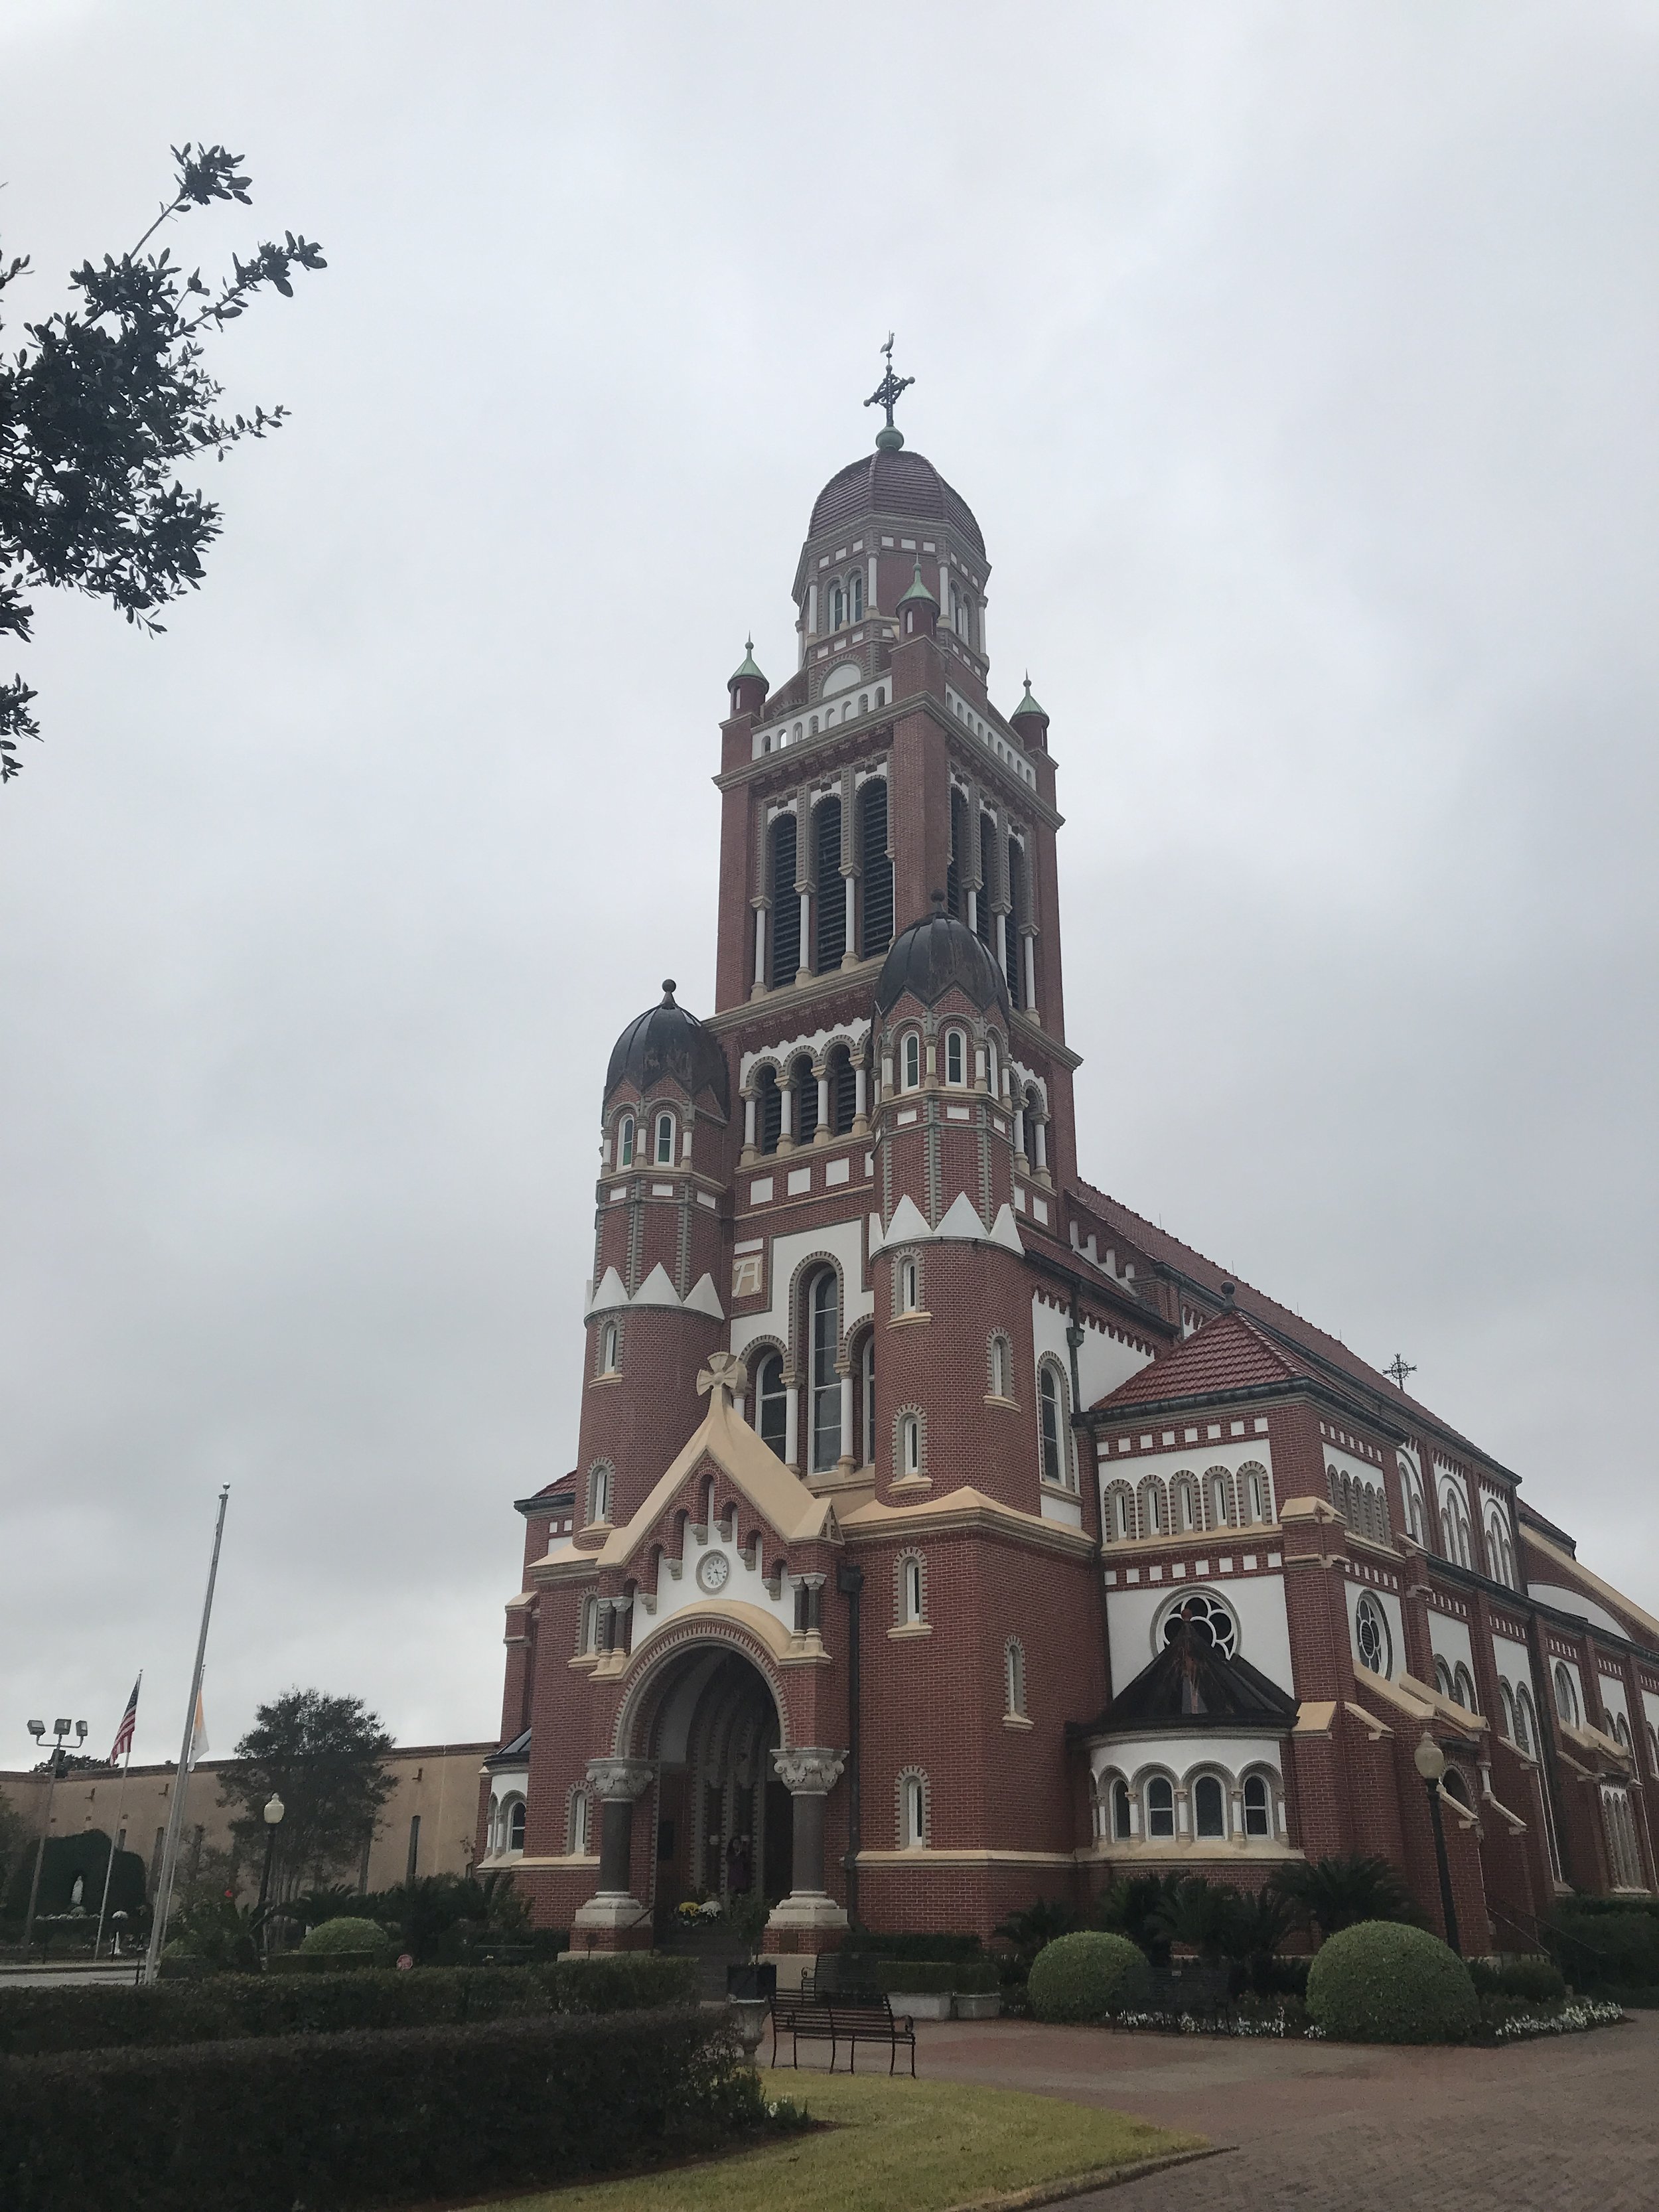 Exterior of La Cathedrale St.-Jean or St. John's Cathedral in Downtown Lafayette, LA